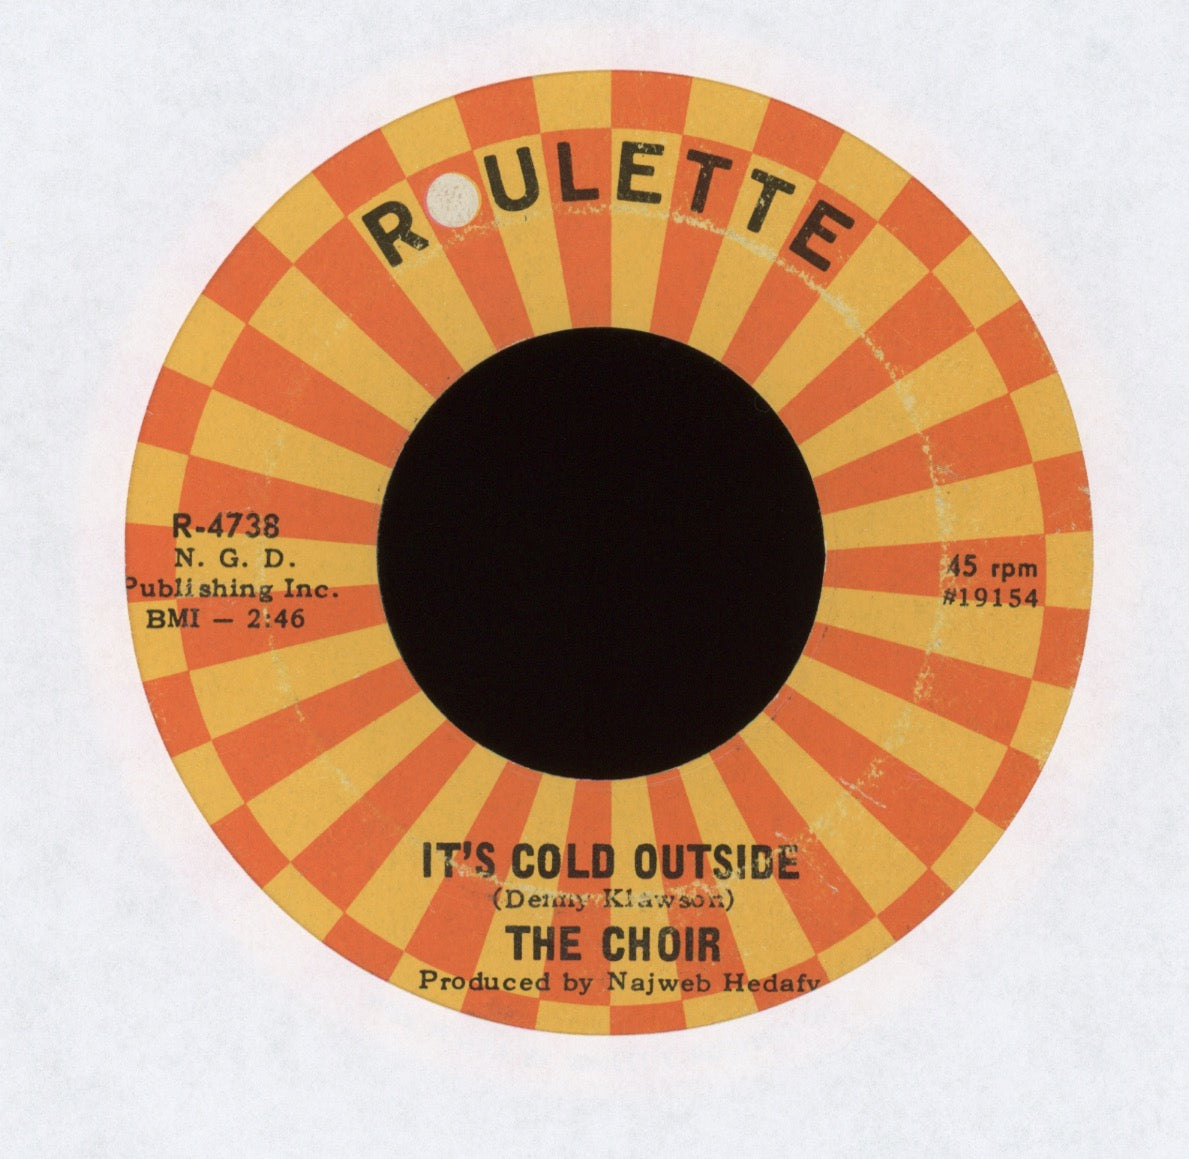 The Choir - It's Cold Outside on Roulette